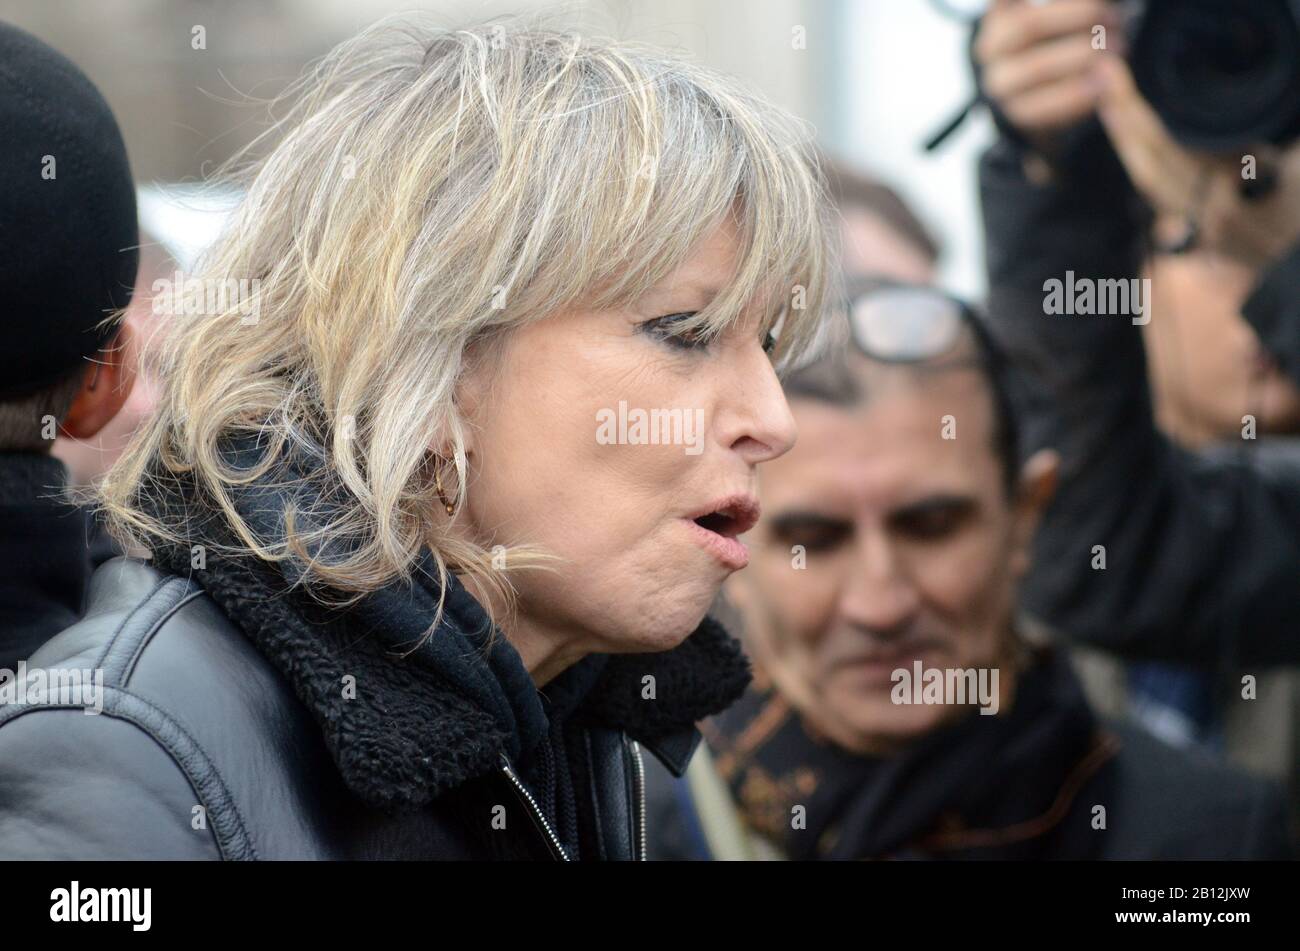 London, UK, 22 Feb 2020 Chrissie Hynde, singer. Rally against the  extradition of Julian Assange in Parliament Square. Credit: JOHNNY  ARMSTEAD/Alamy Live News Stock Photo - Alamy